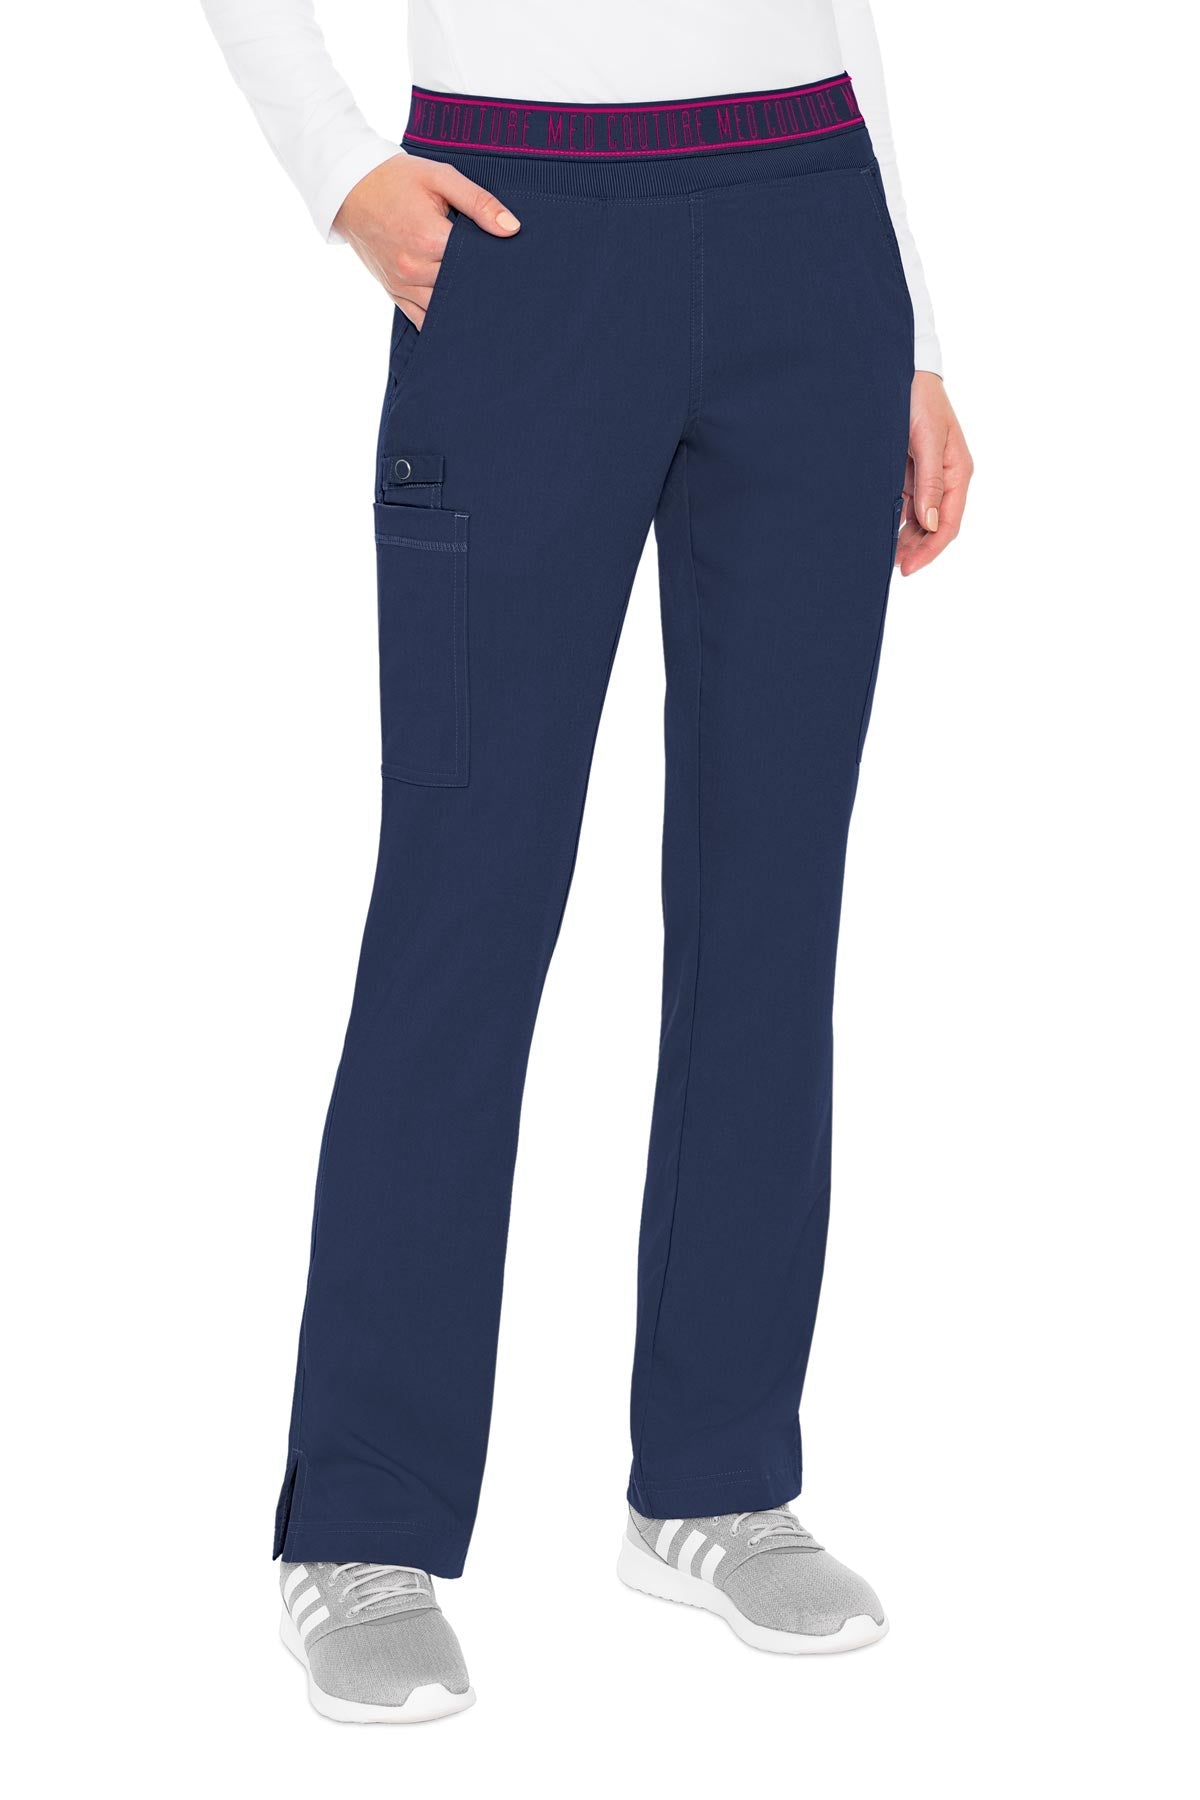 Med Couture Navy PANT